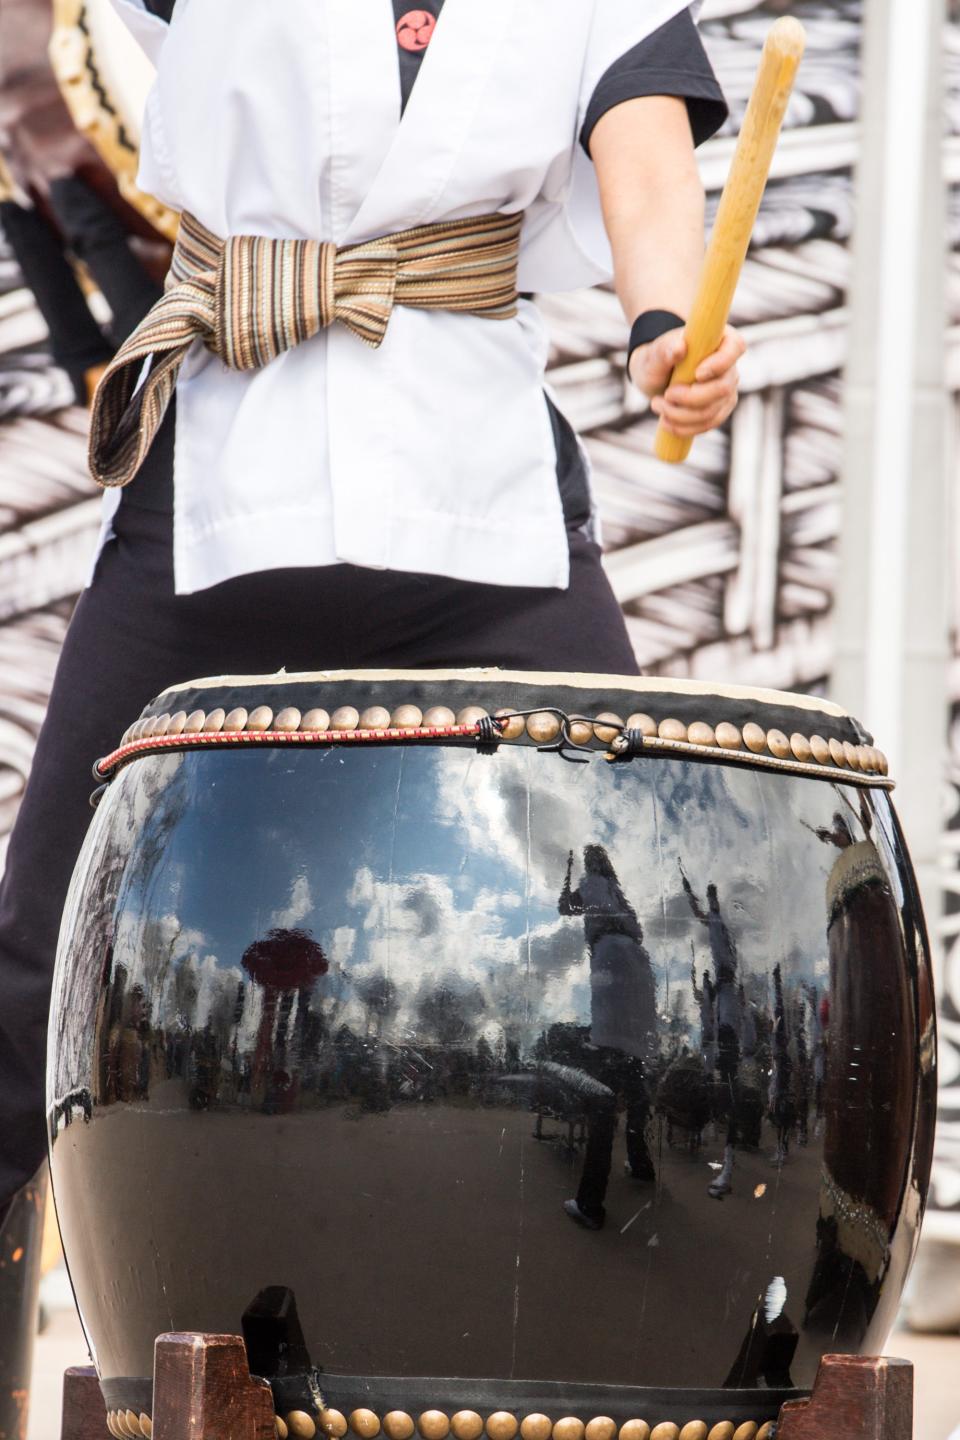 Drummers are reflected in a black drum while "Ken Koshio Gumi" with special guests "Samurai Spirits" perform during the annual Matsuri Festival on Feb. 23, 2020 at Steele Indian School Park in Phoenix.